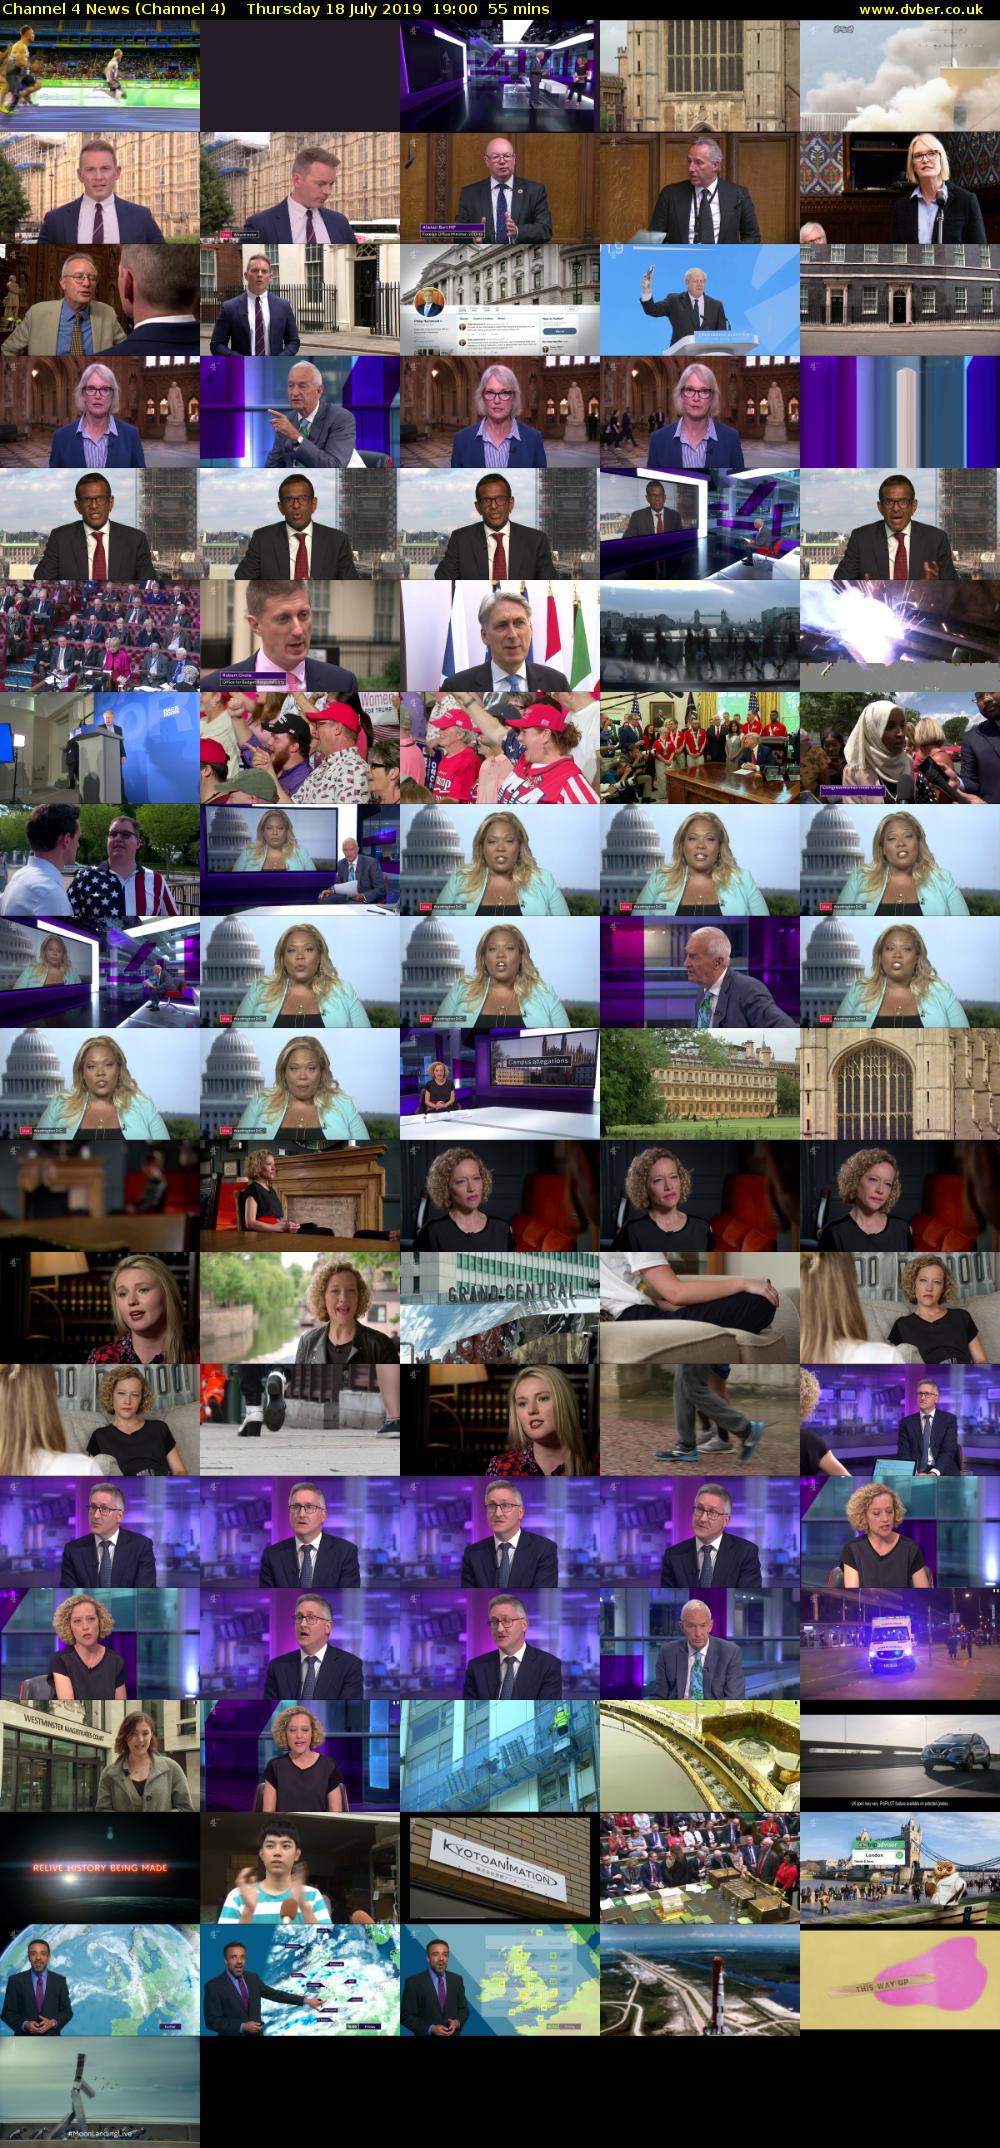 Channel 4 News (Channel 4) Thursday 18 July 2019 19:00 - 19:55